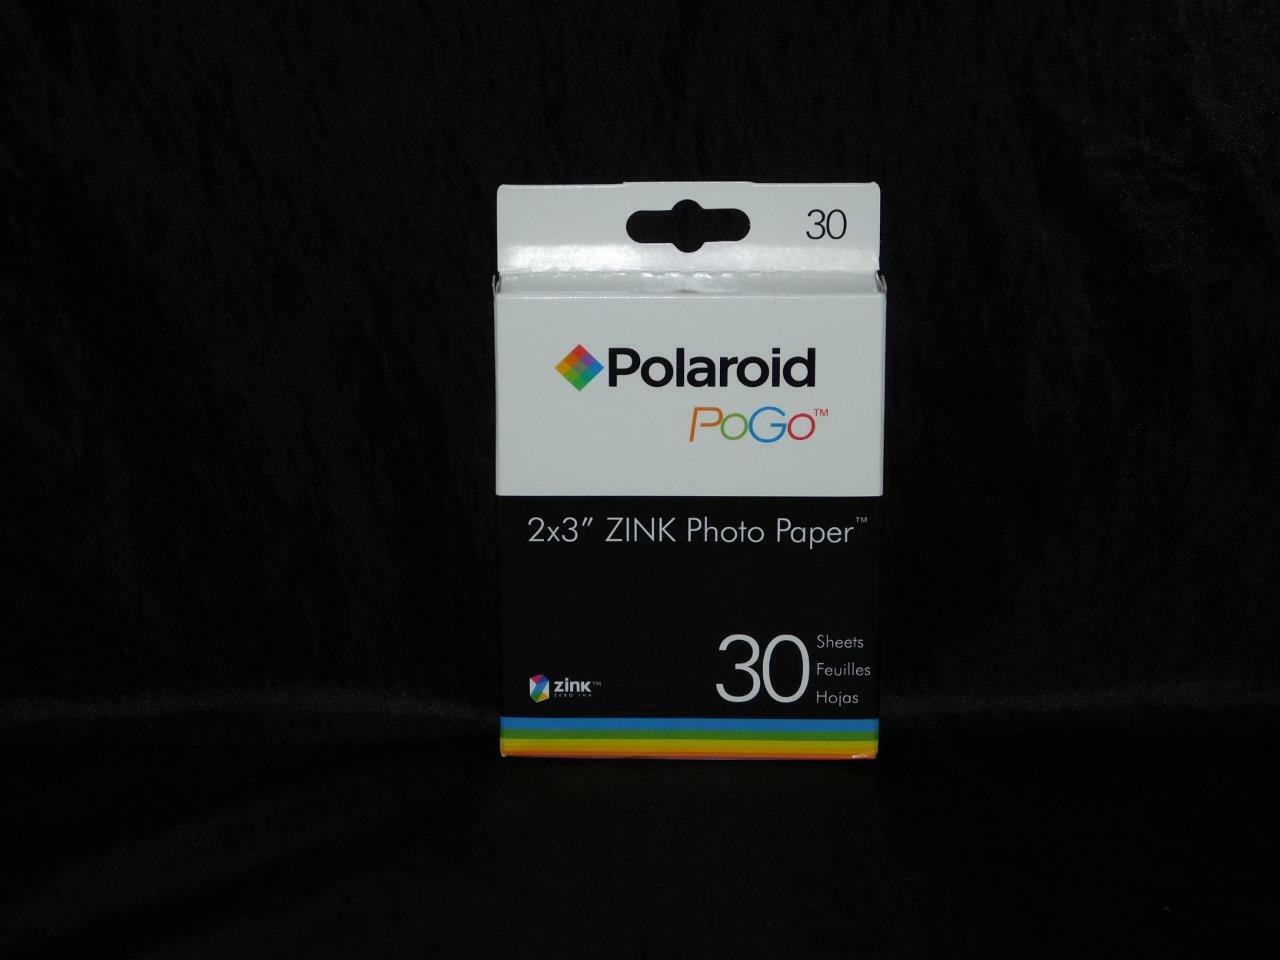 Polaroid PoGo 2x3" Zink Photo Paper 30 Sheets NEW Sticky Backed Full Color USA